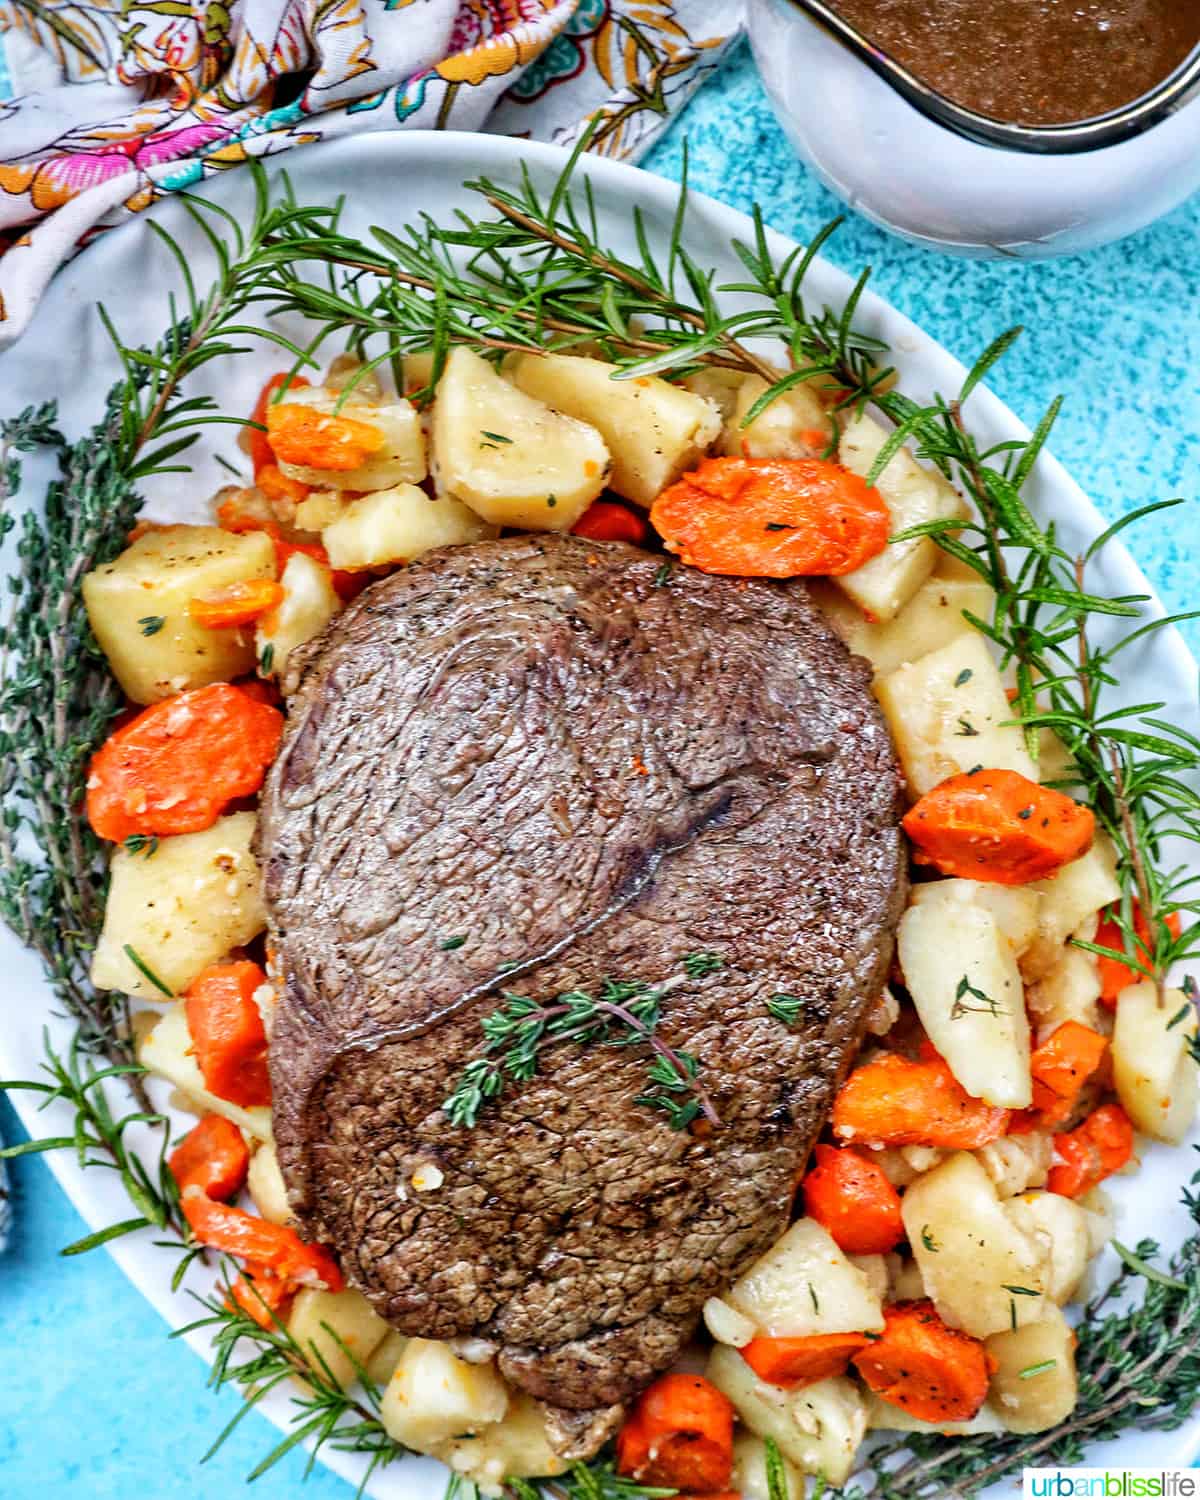 serving plate with cooked sirloin tip roast surrounded by carrots, potatoes, and herbs with a side of gravy.